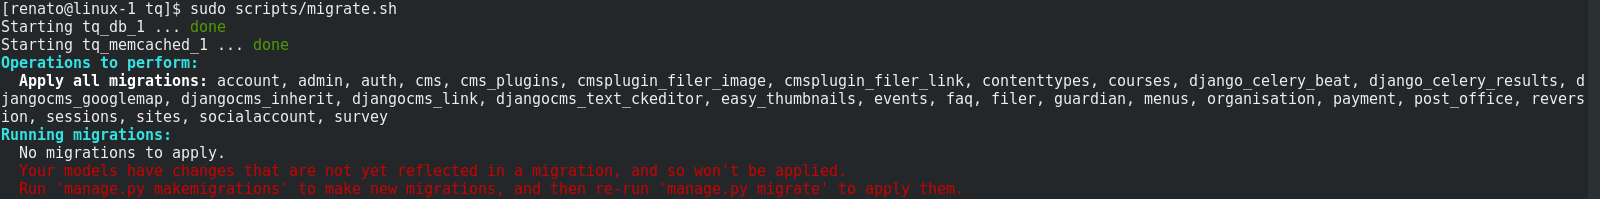 Output of migrate.sh